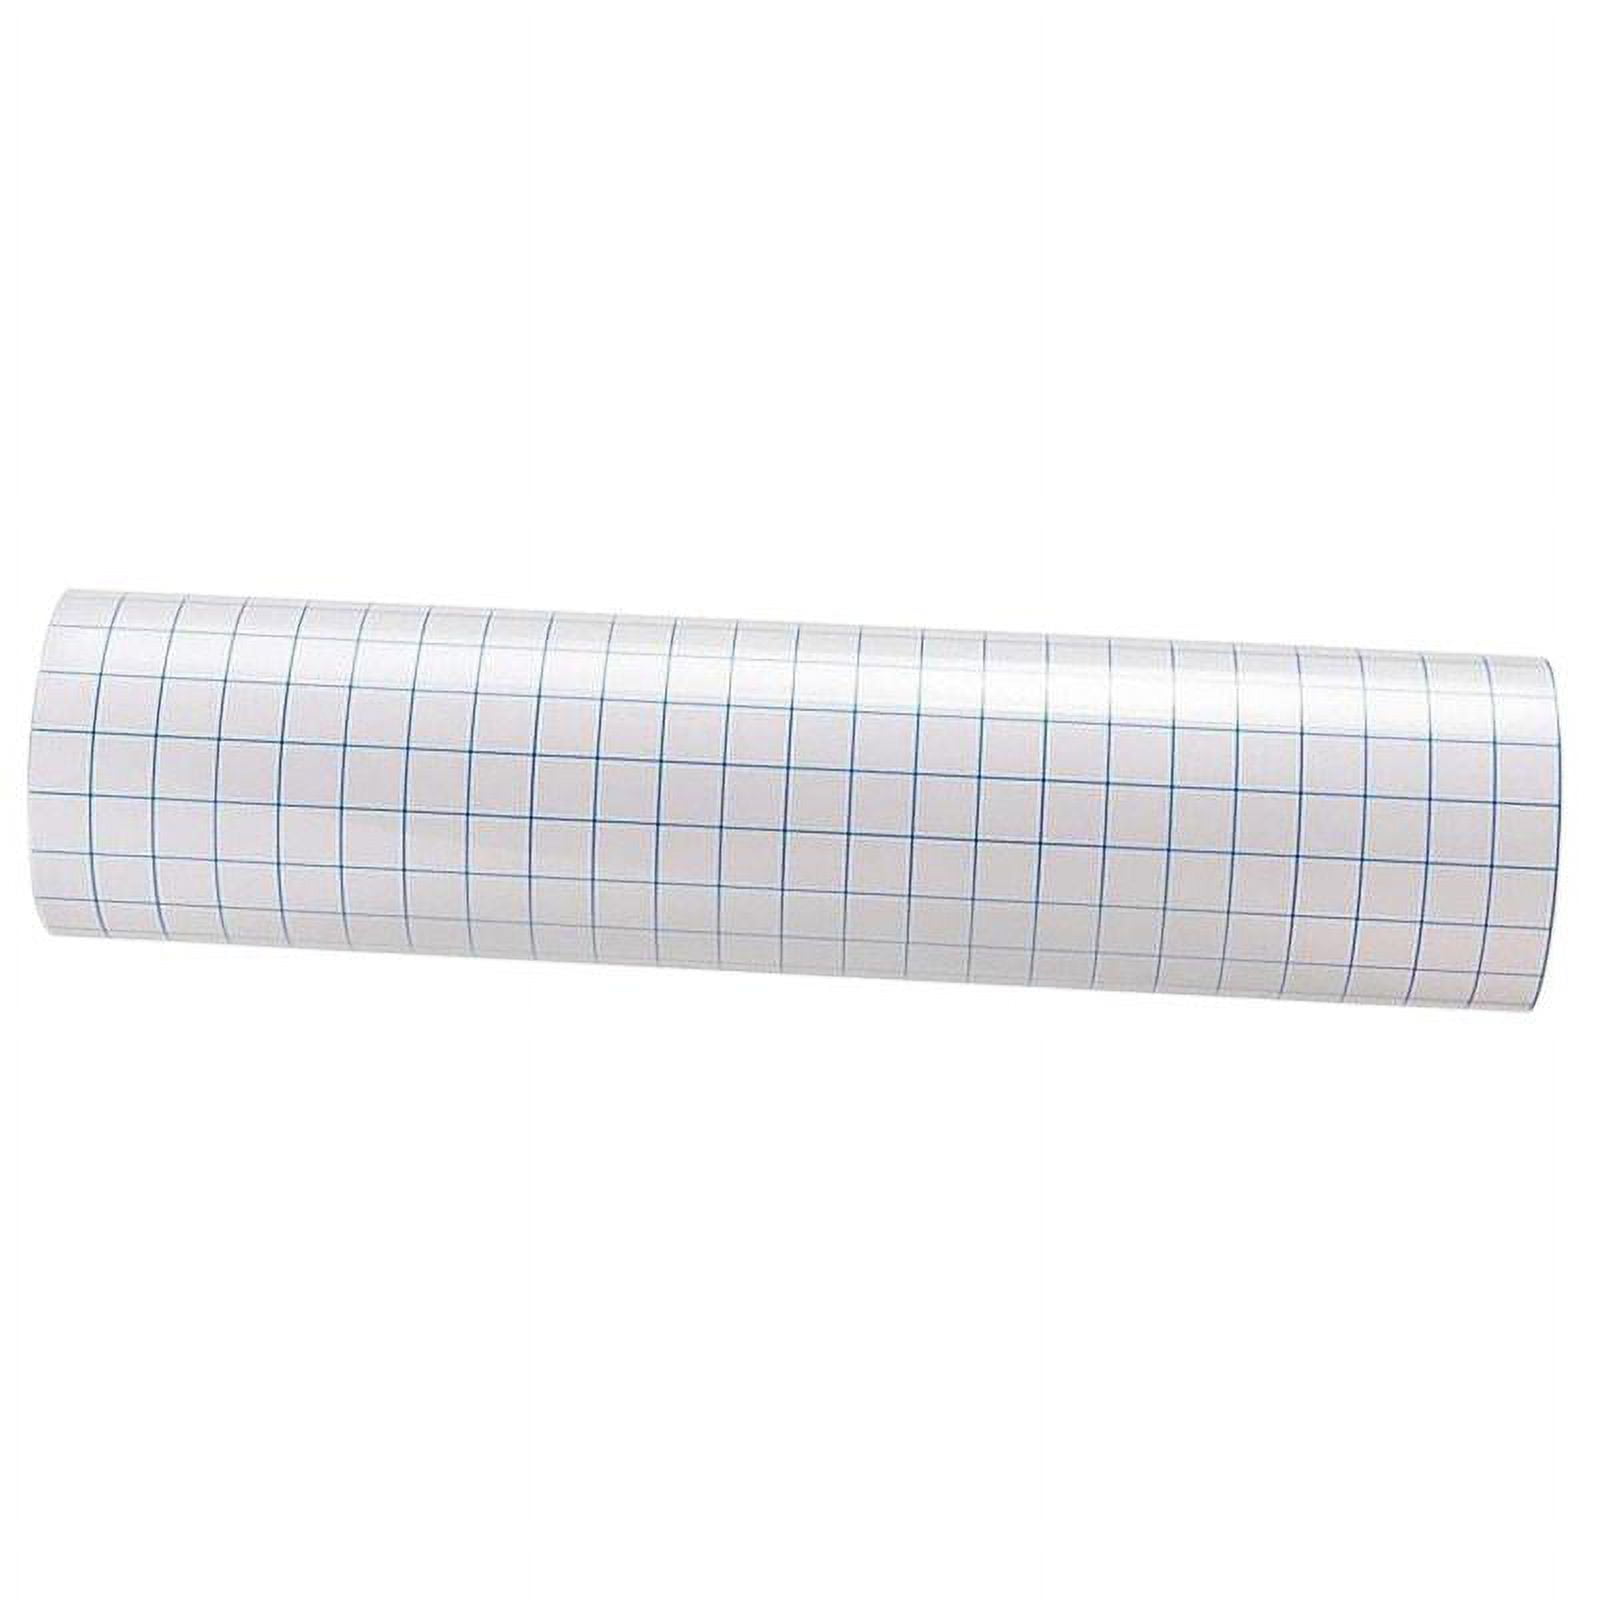 Vinyl Ease 12 inch x 20 Feet Roll of Clear Vinyl Transfer Tape with Grid Is A Medium Tack Adhesive, 1 inch grid. American Made Application Tape for